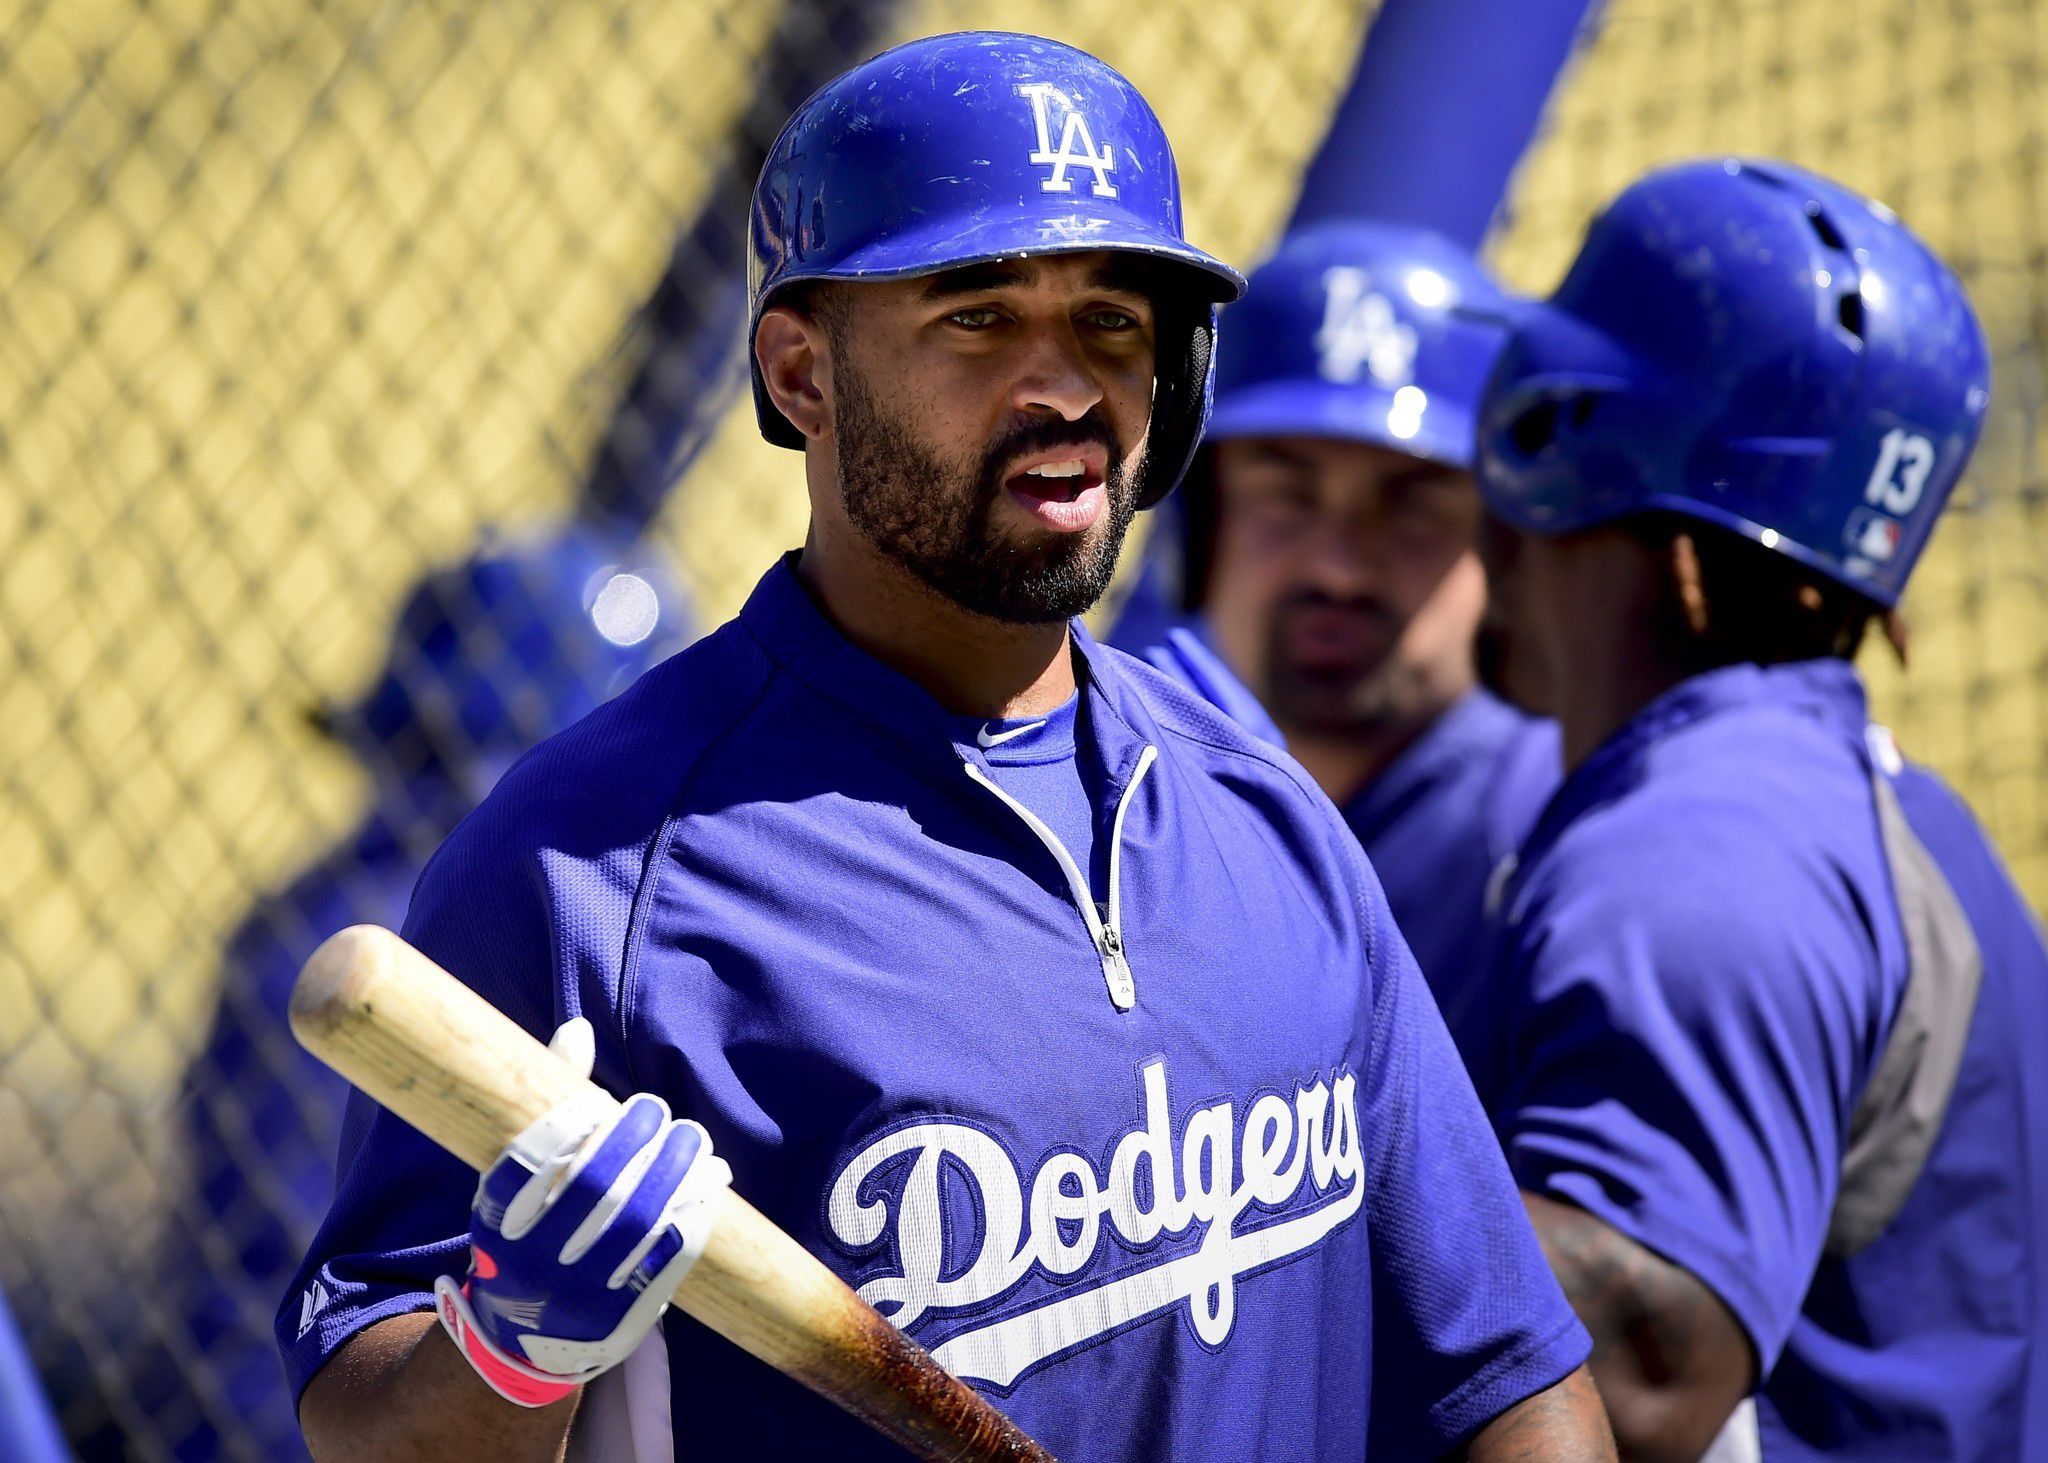 Matt Kemp stands behind agent Dave Stewart's comments, would accept trade  for more playing time.